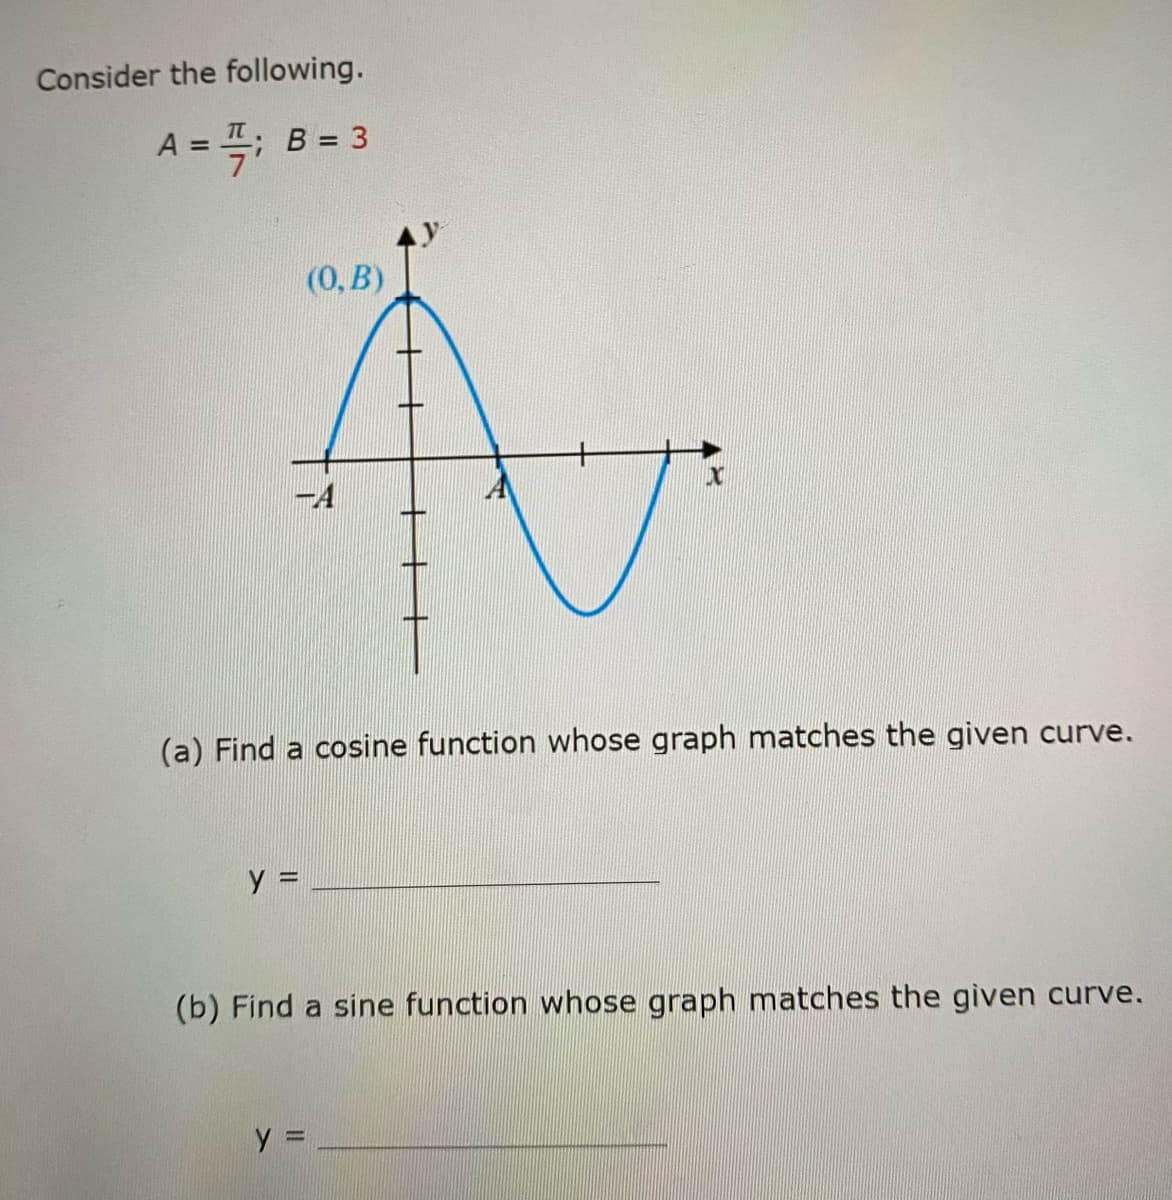 Consider the following.
A = 1; B = 3
(0,B)
y =
A
X
(a) Find a cosine function whose graph matches the given curve.
(b) Find a sine function whose graph matches the given curve.